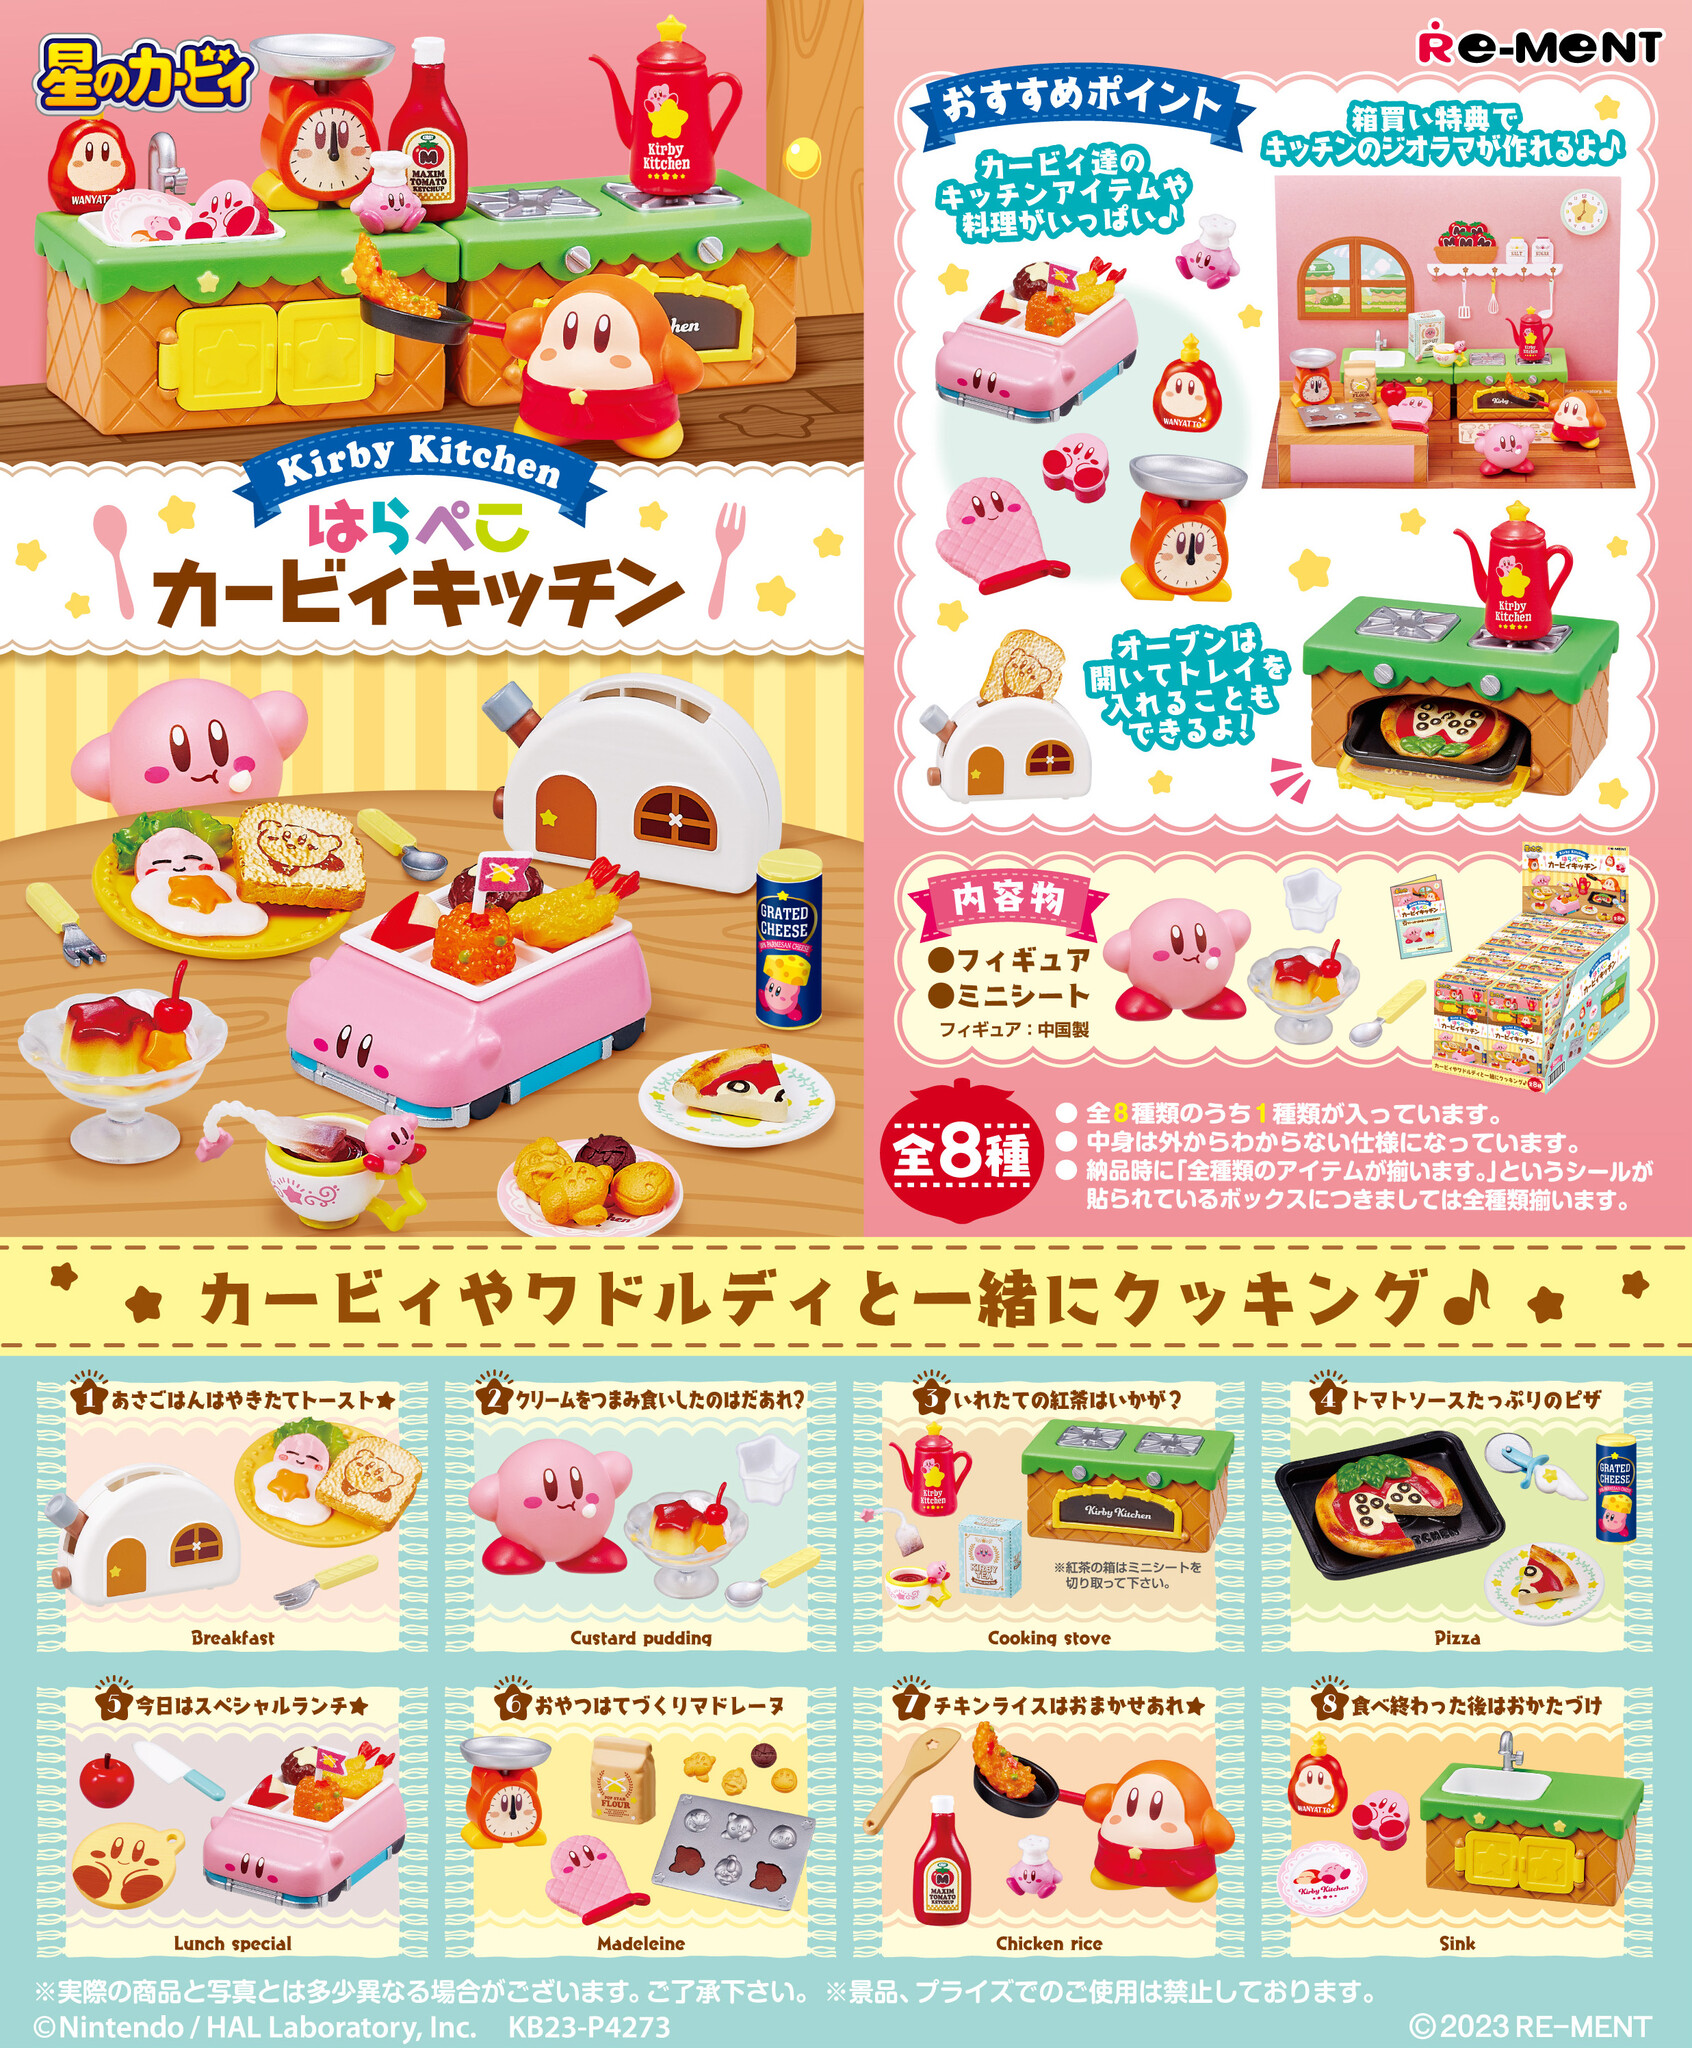 Re-ment - Kirby Kitchen Blind Box image count 0